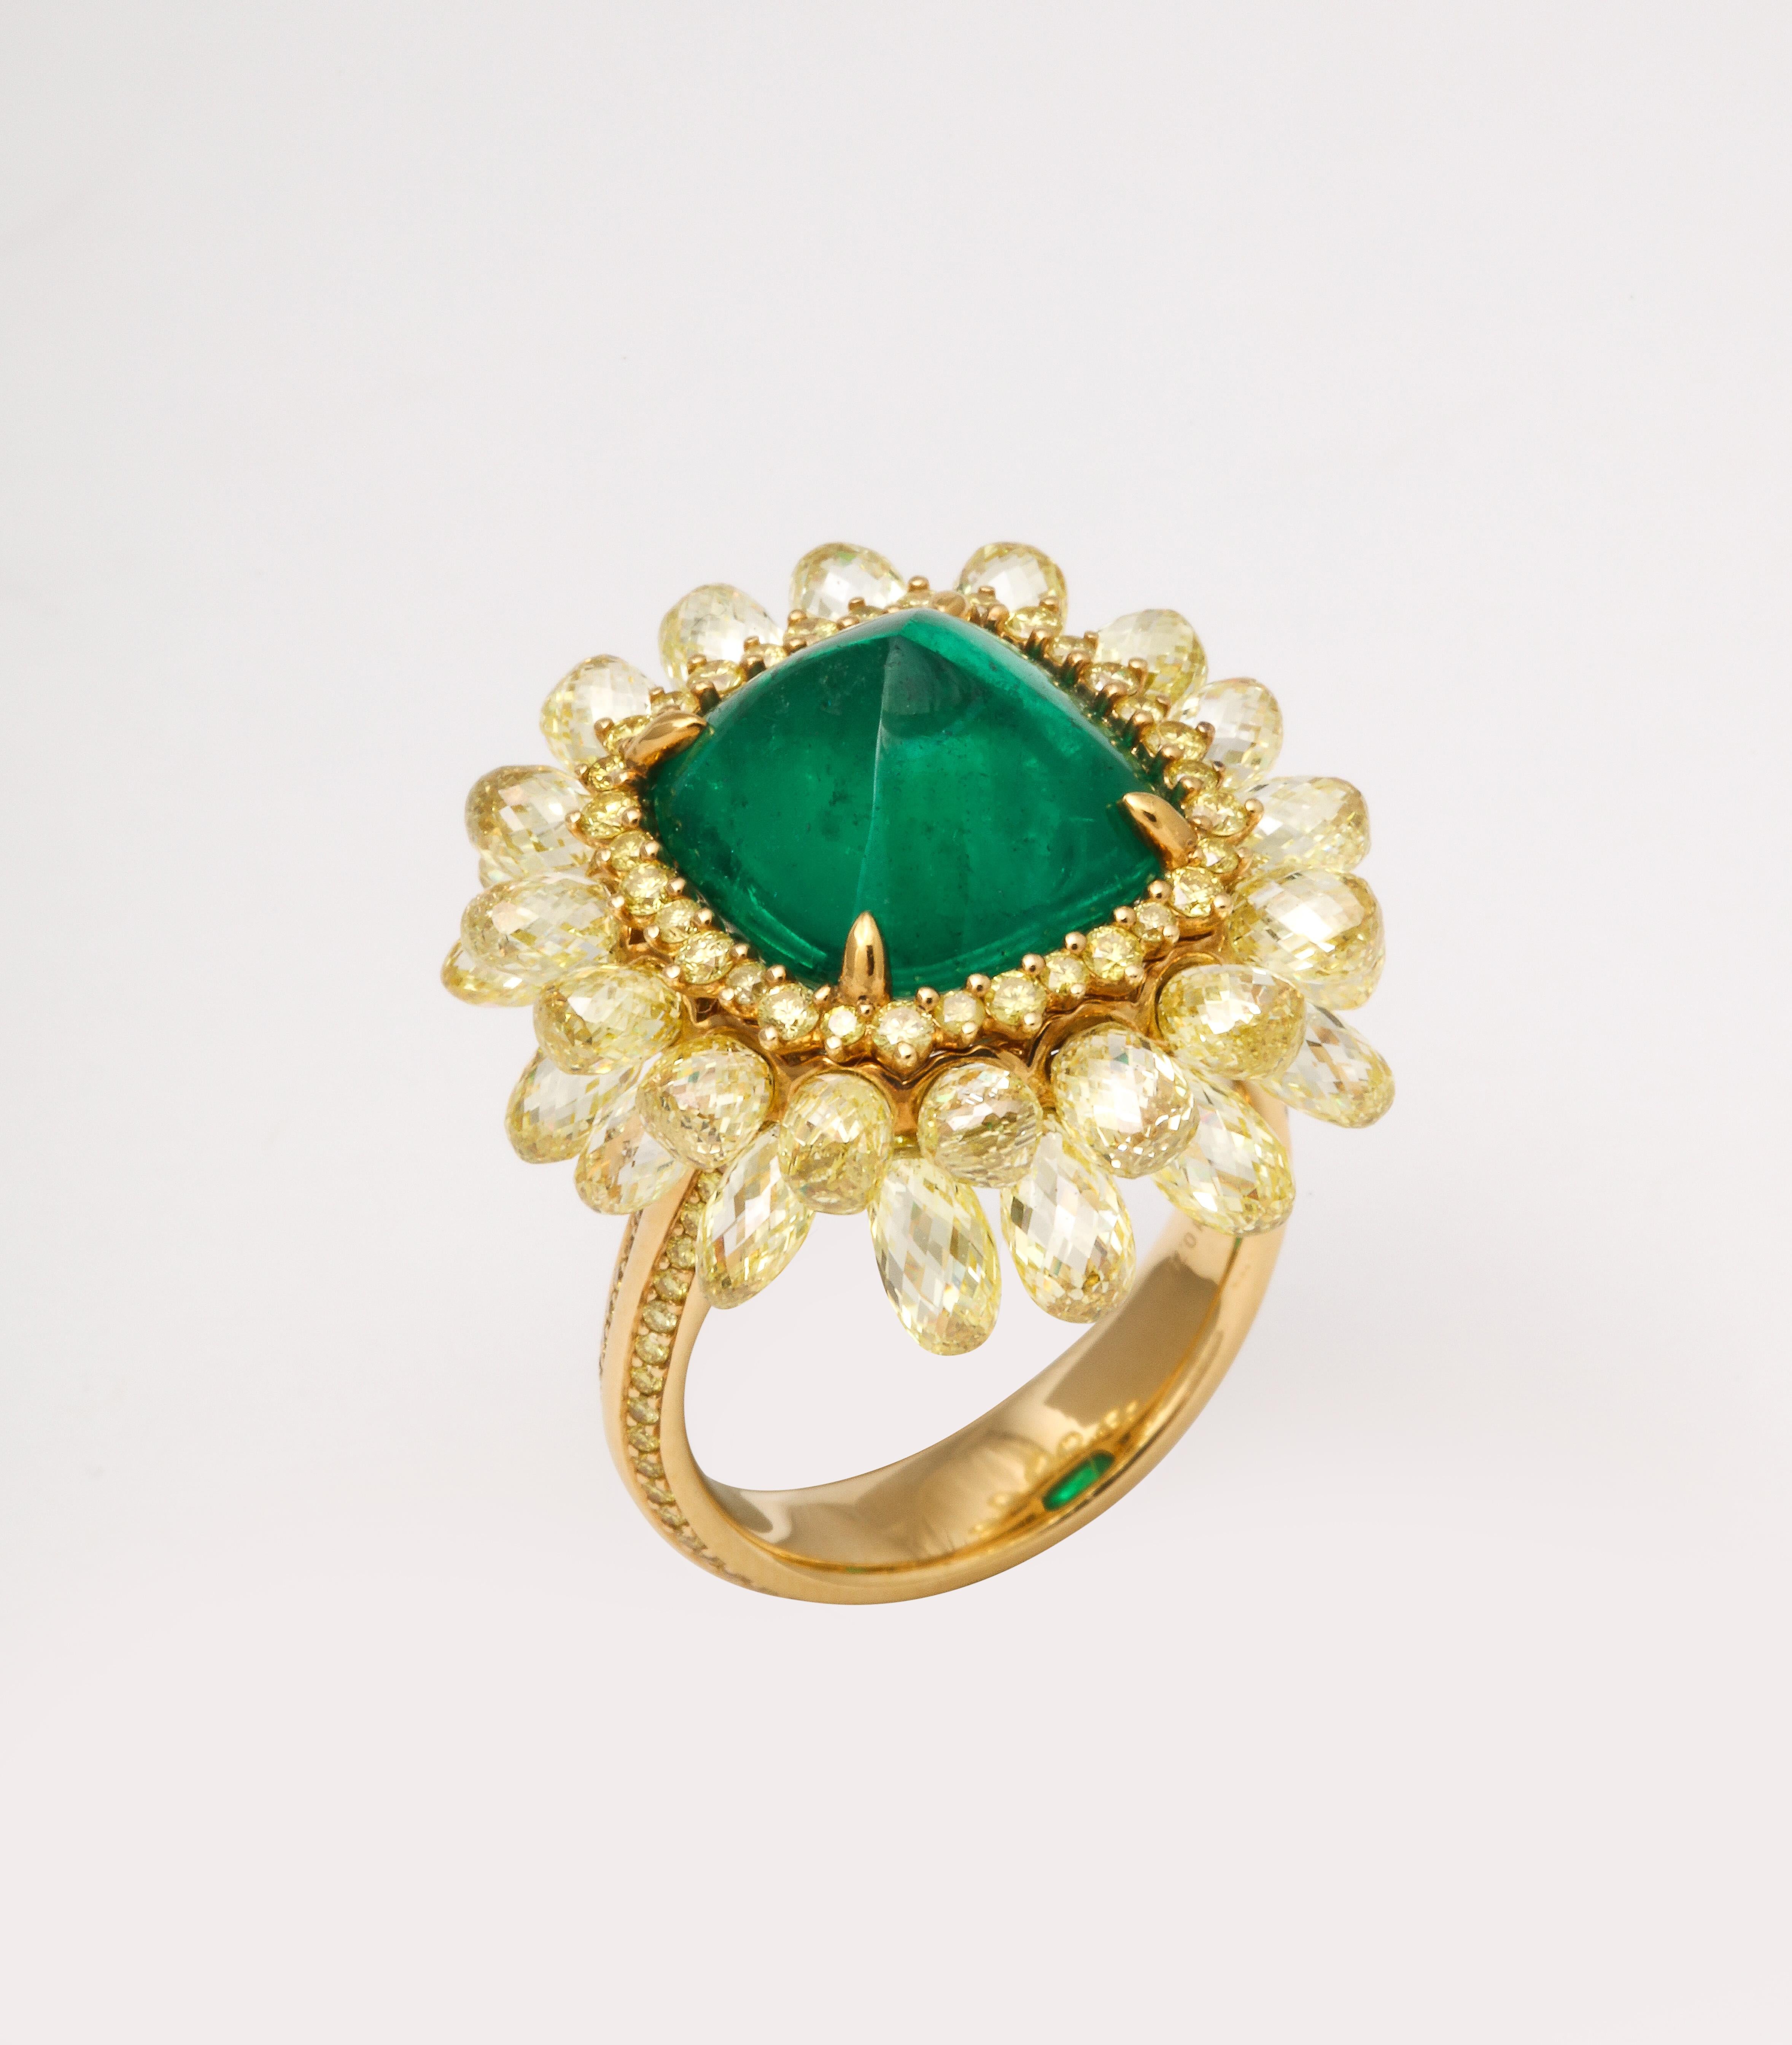 5 carat Sugarloaf Cabochon Emerald and Yellow Diamond Ring For Sale 6